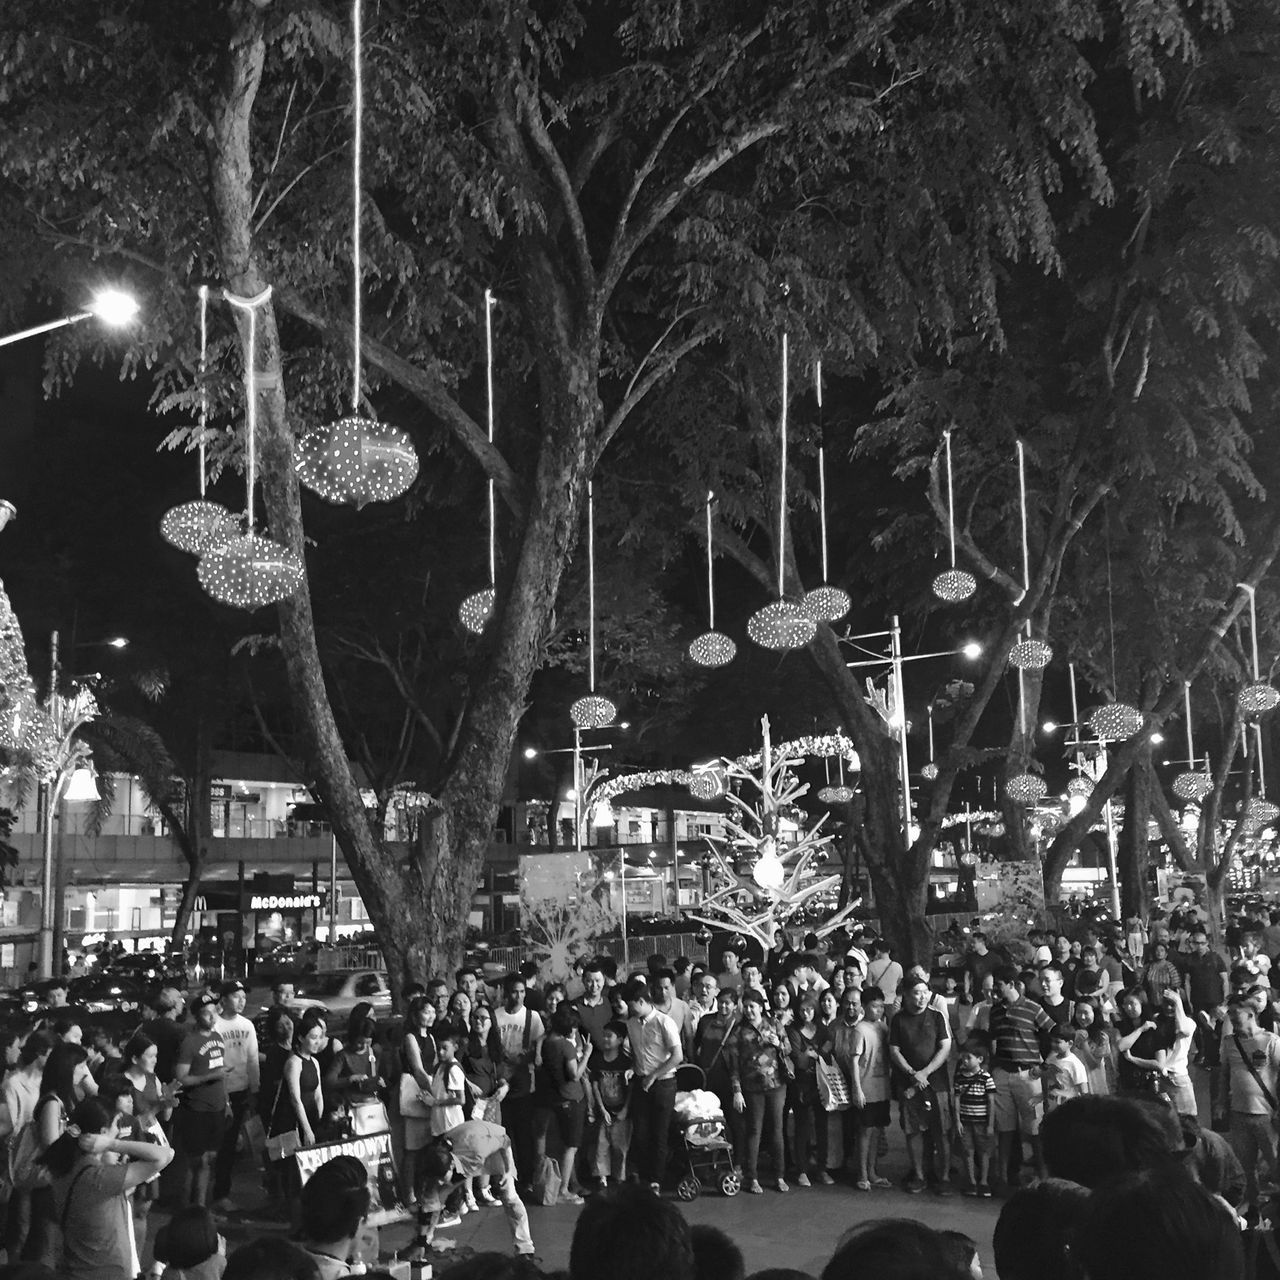 illuminated, large group of people, night, men, lifestyles, crowd, person, tree, lighting equipment, leisure activity, celebration, street light, arts culture and entertainment, event, city, city life, mixed age range, street, enjoyment